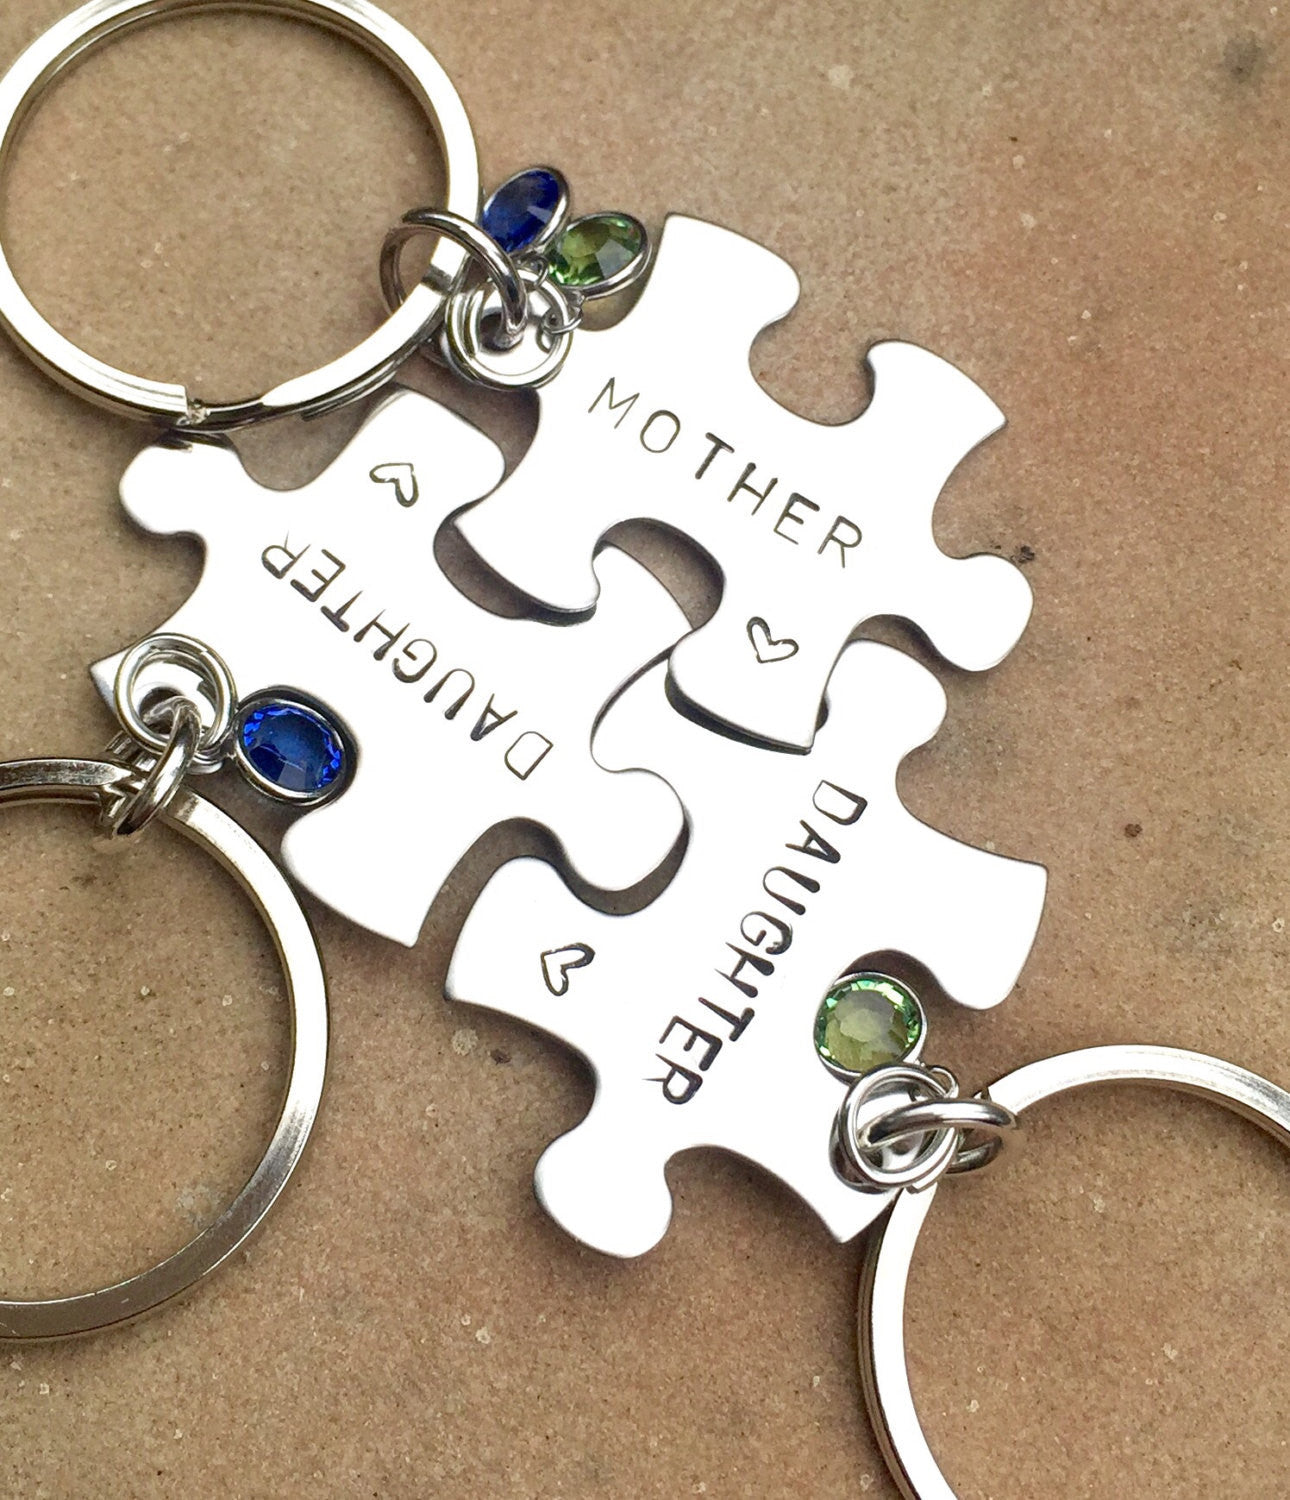 Mother Daughter Keychain,Mother Daughter Gifts, Mothers Day Gifts, Puzzle Keychains, Personalized Keychains, Natashaaloha - Natashaaloha, jewelry, bracelets, necklace, keychains, fishing lures, gifts for men, charms, personalized, 